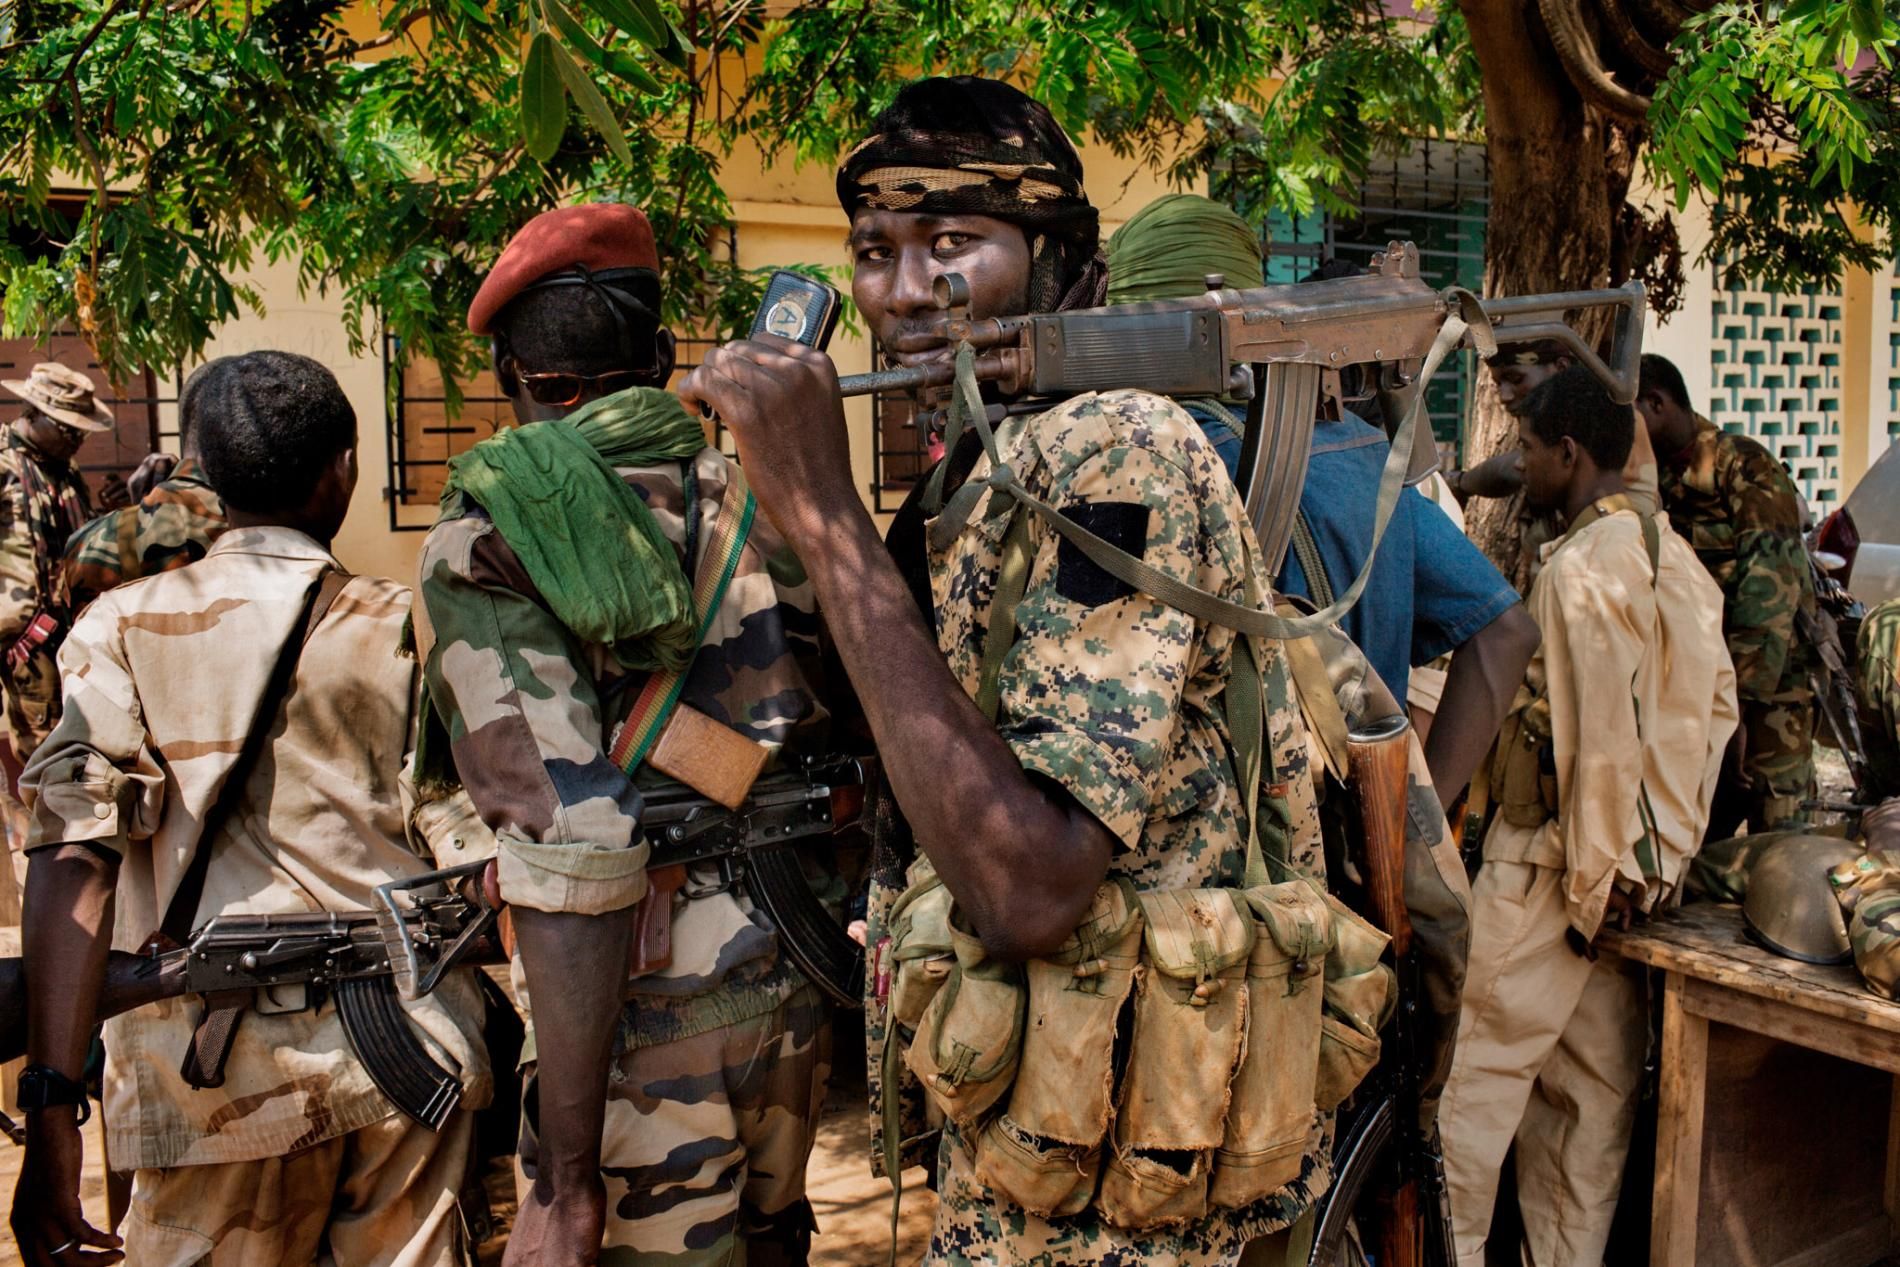 Although religion has little to do with how the conflict started, the violence has since divided the country along religious lines. Rebel groups calling themselves the Seleka (left), composed mostly of Muslims from the north, toppled the government in 2013. The Seleka’s brutal treatment of Christian and animist civilians led to the rise of the Anti-Balaka (right), local militias formed to drive the Seleka out of their towns and villages. Image by Markus Bleasdale. Central African Republic.